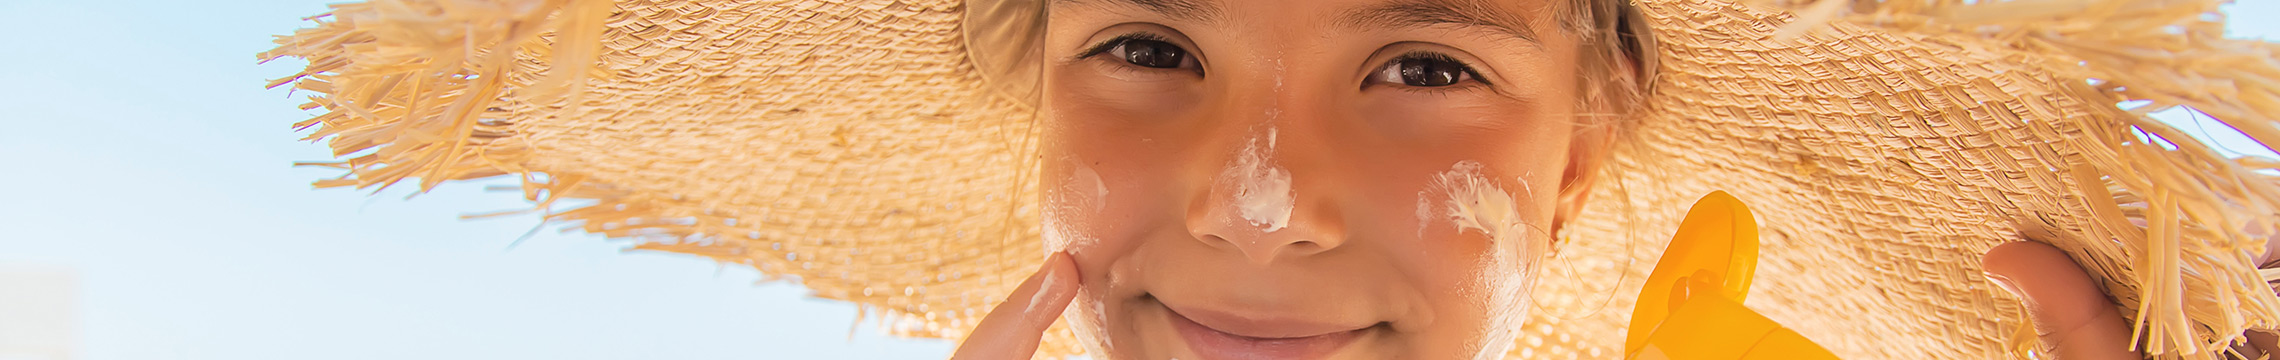 Child applying sunscreen to face while wearing large sun hat